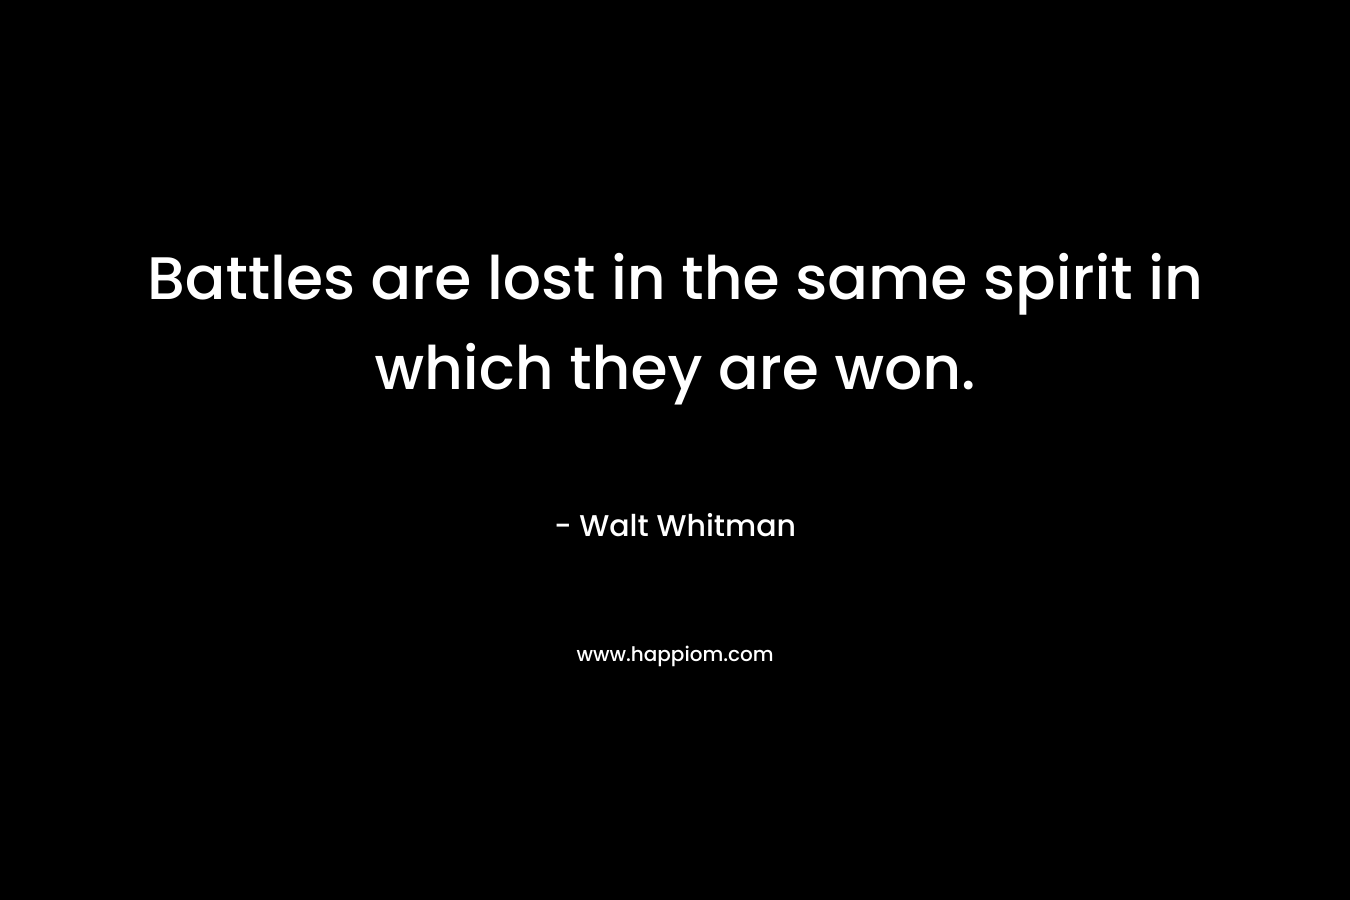 Battles are lost in the same spirit in which they are won.